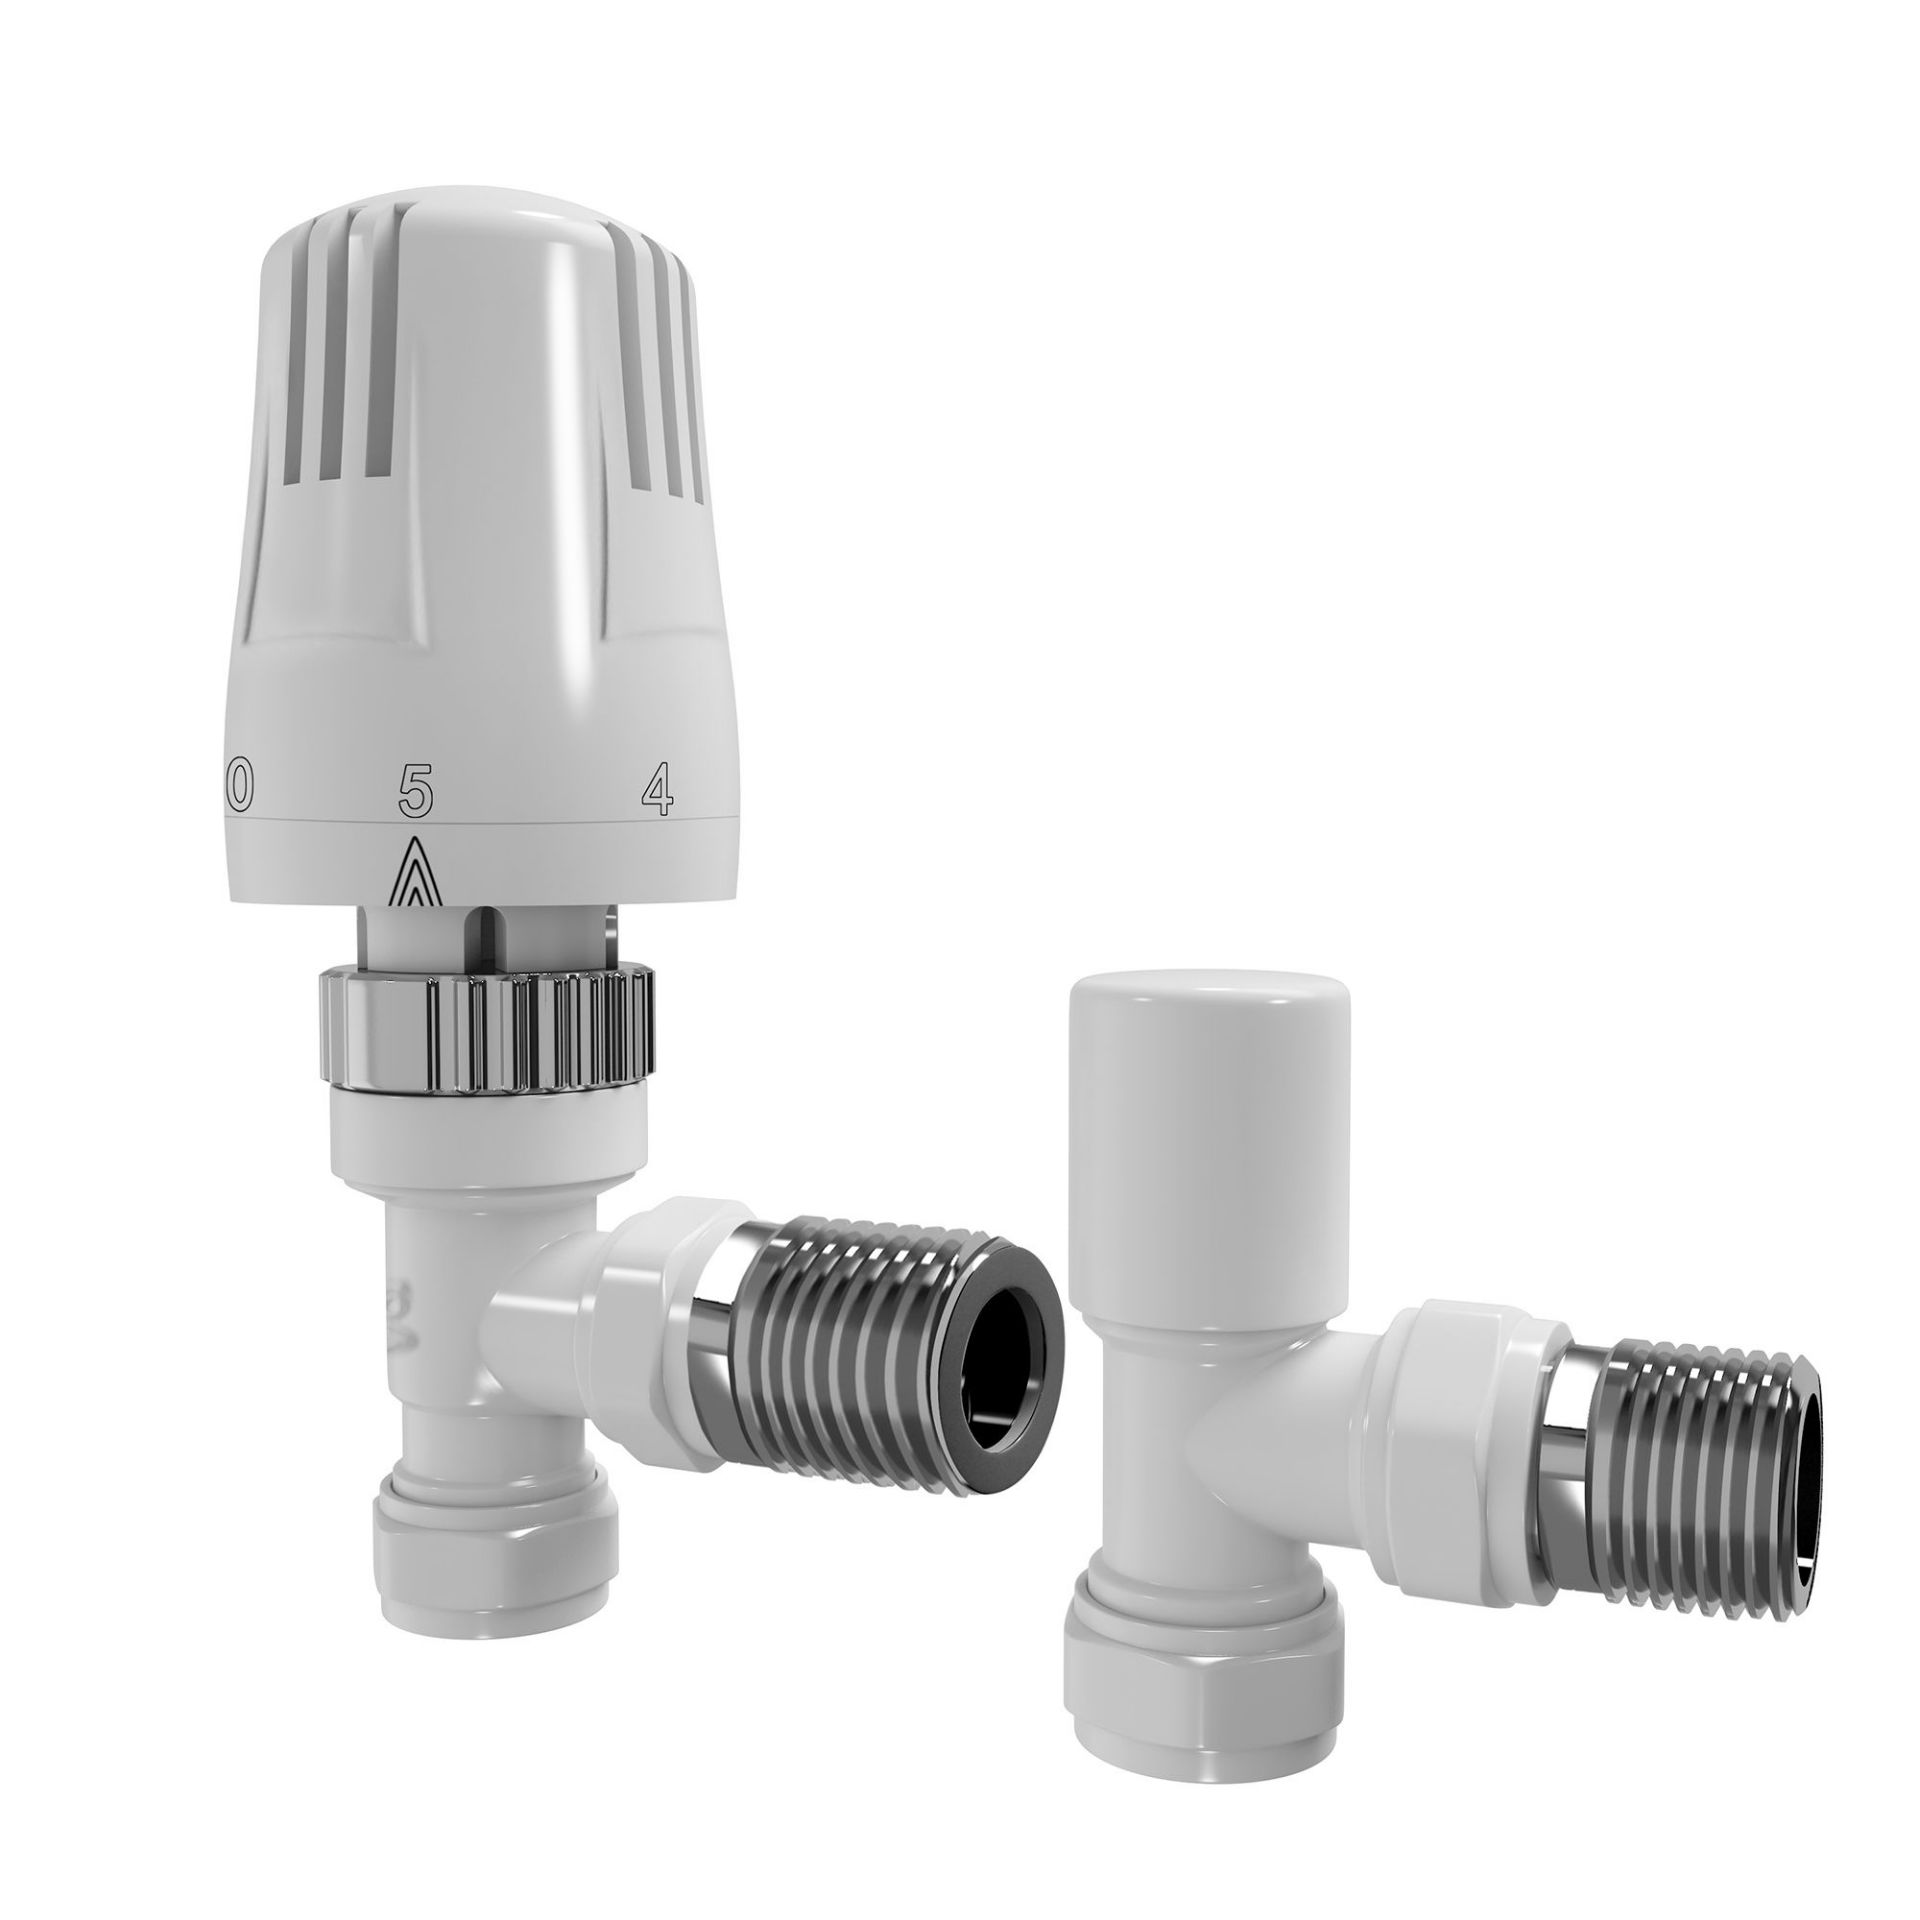 (FF1003) 15mm Standard Connection Thermostatic Angled Gloss White Radiator Valves Solid brass ... - Image 2 of 3